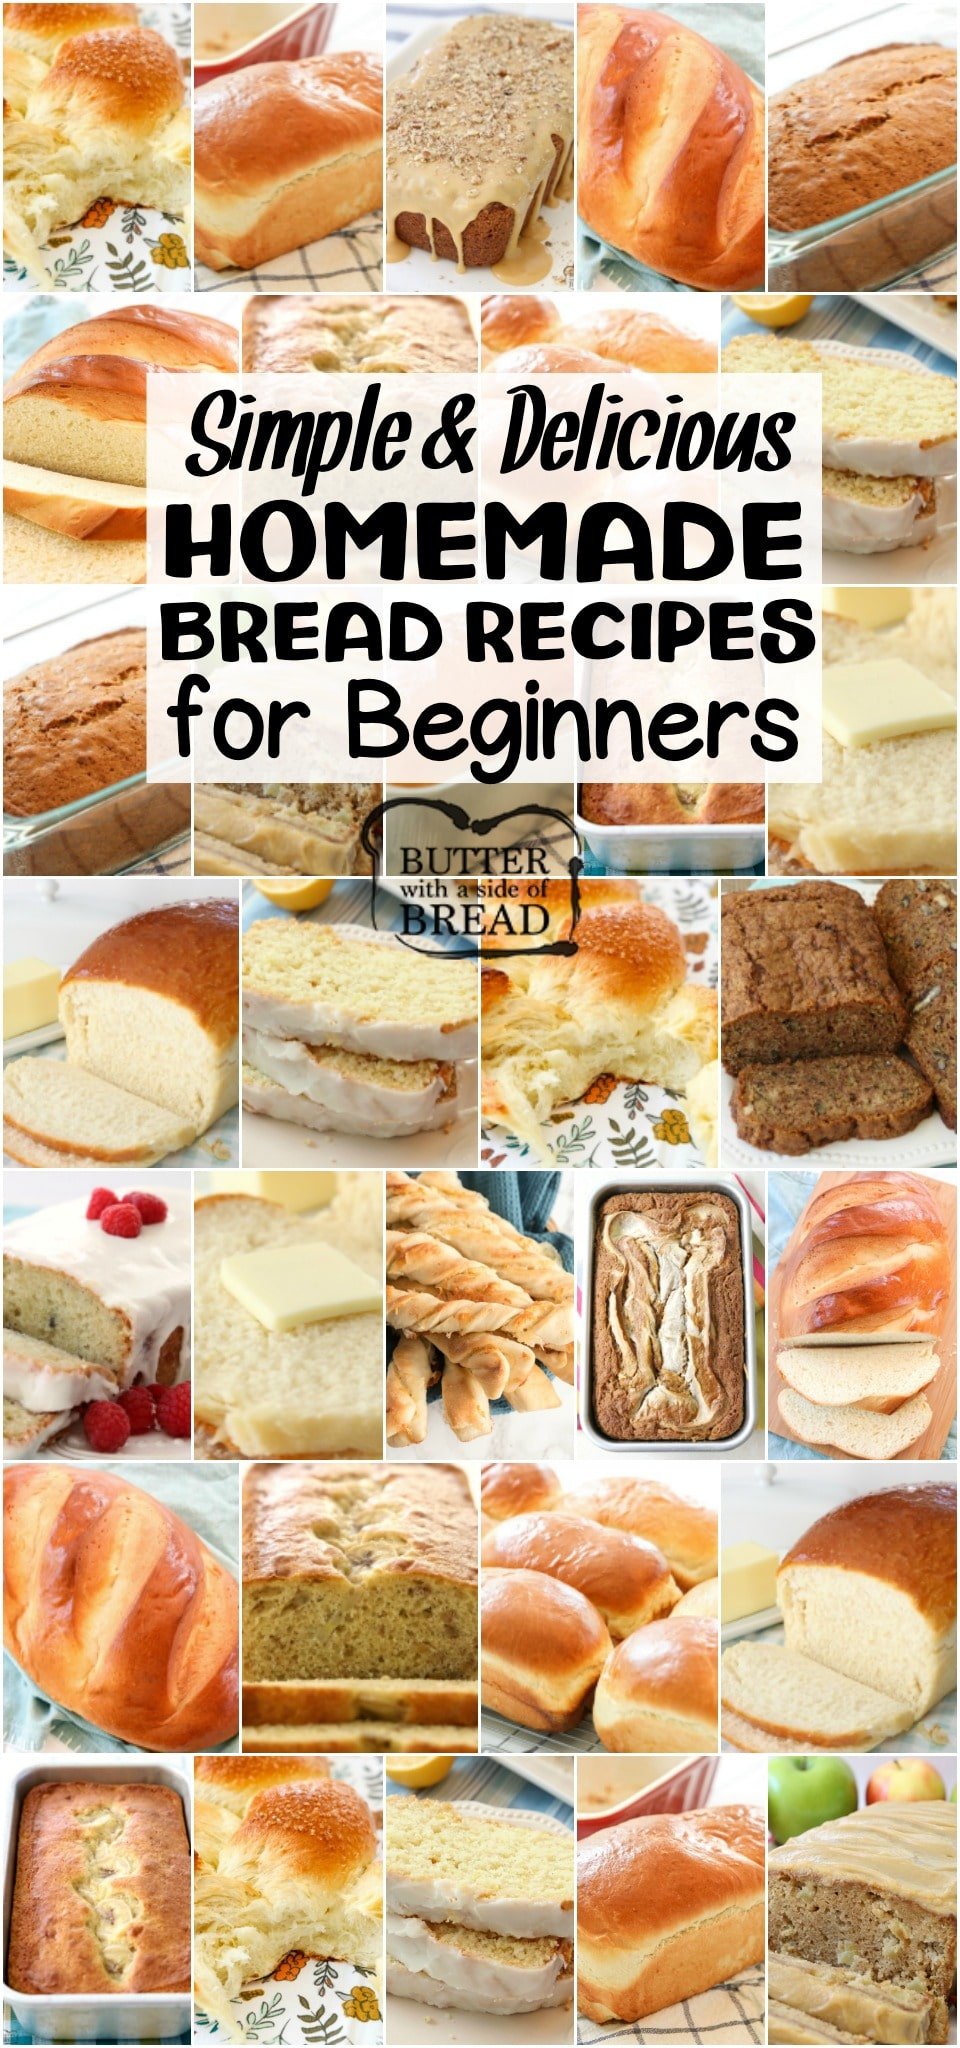 Easy Homemade Bread Recipes for Beginners~ from sweet to savory, quick breads to yeast breads, you're going to love this bread! Most popular easy bread recipes we can't get enough of. If you want to make bread, START HERE!